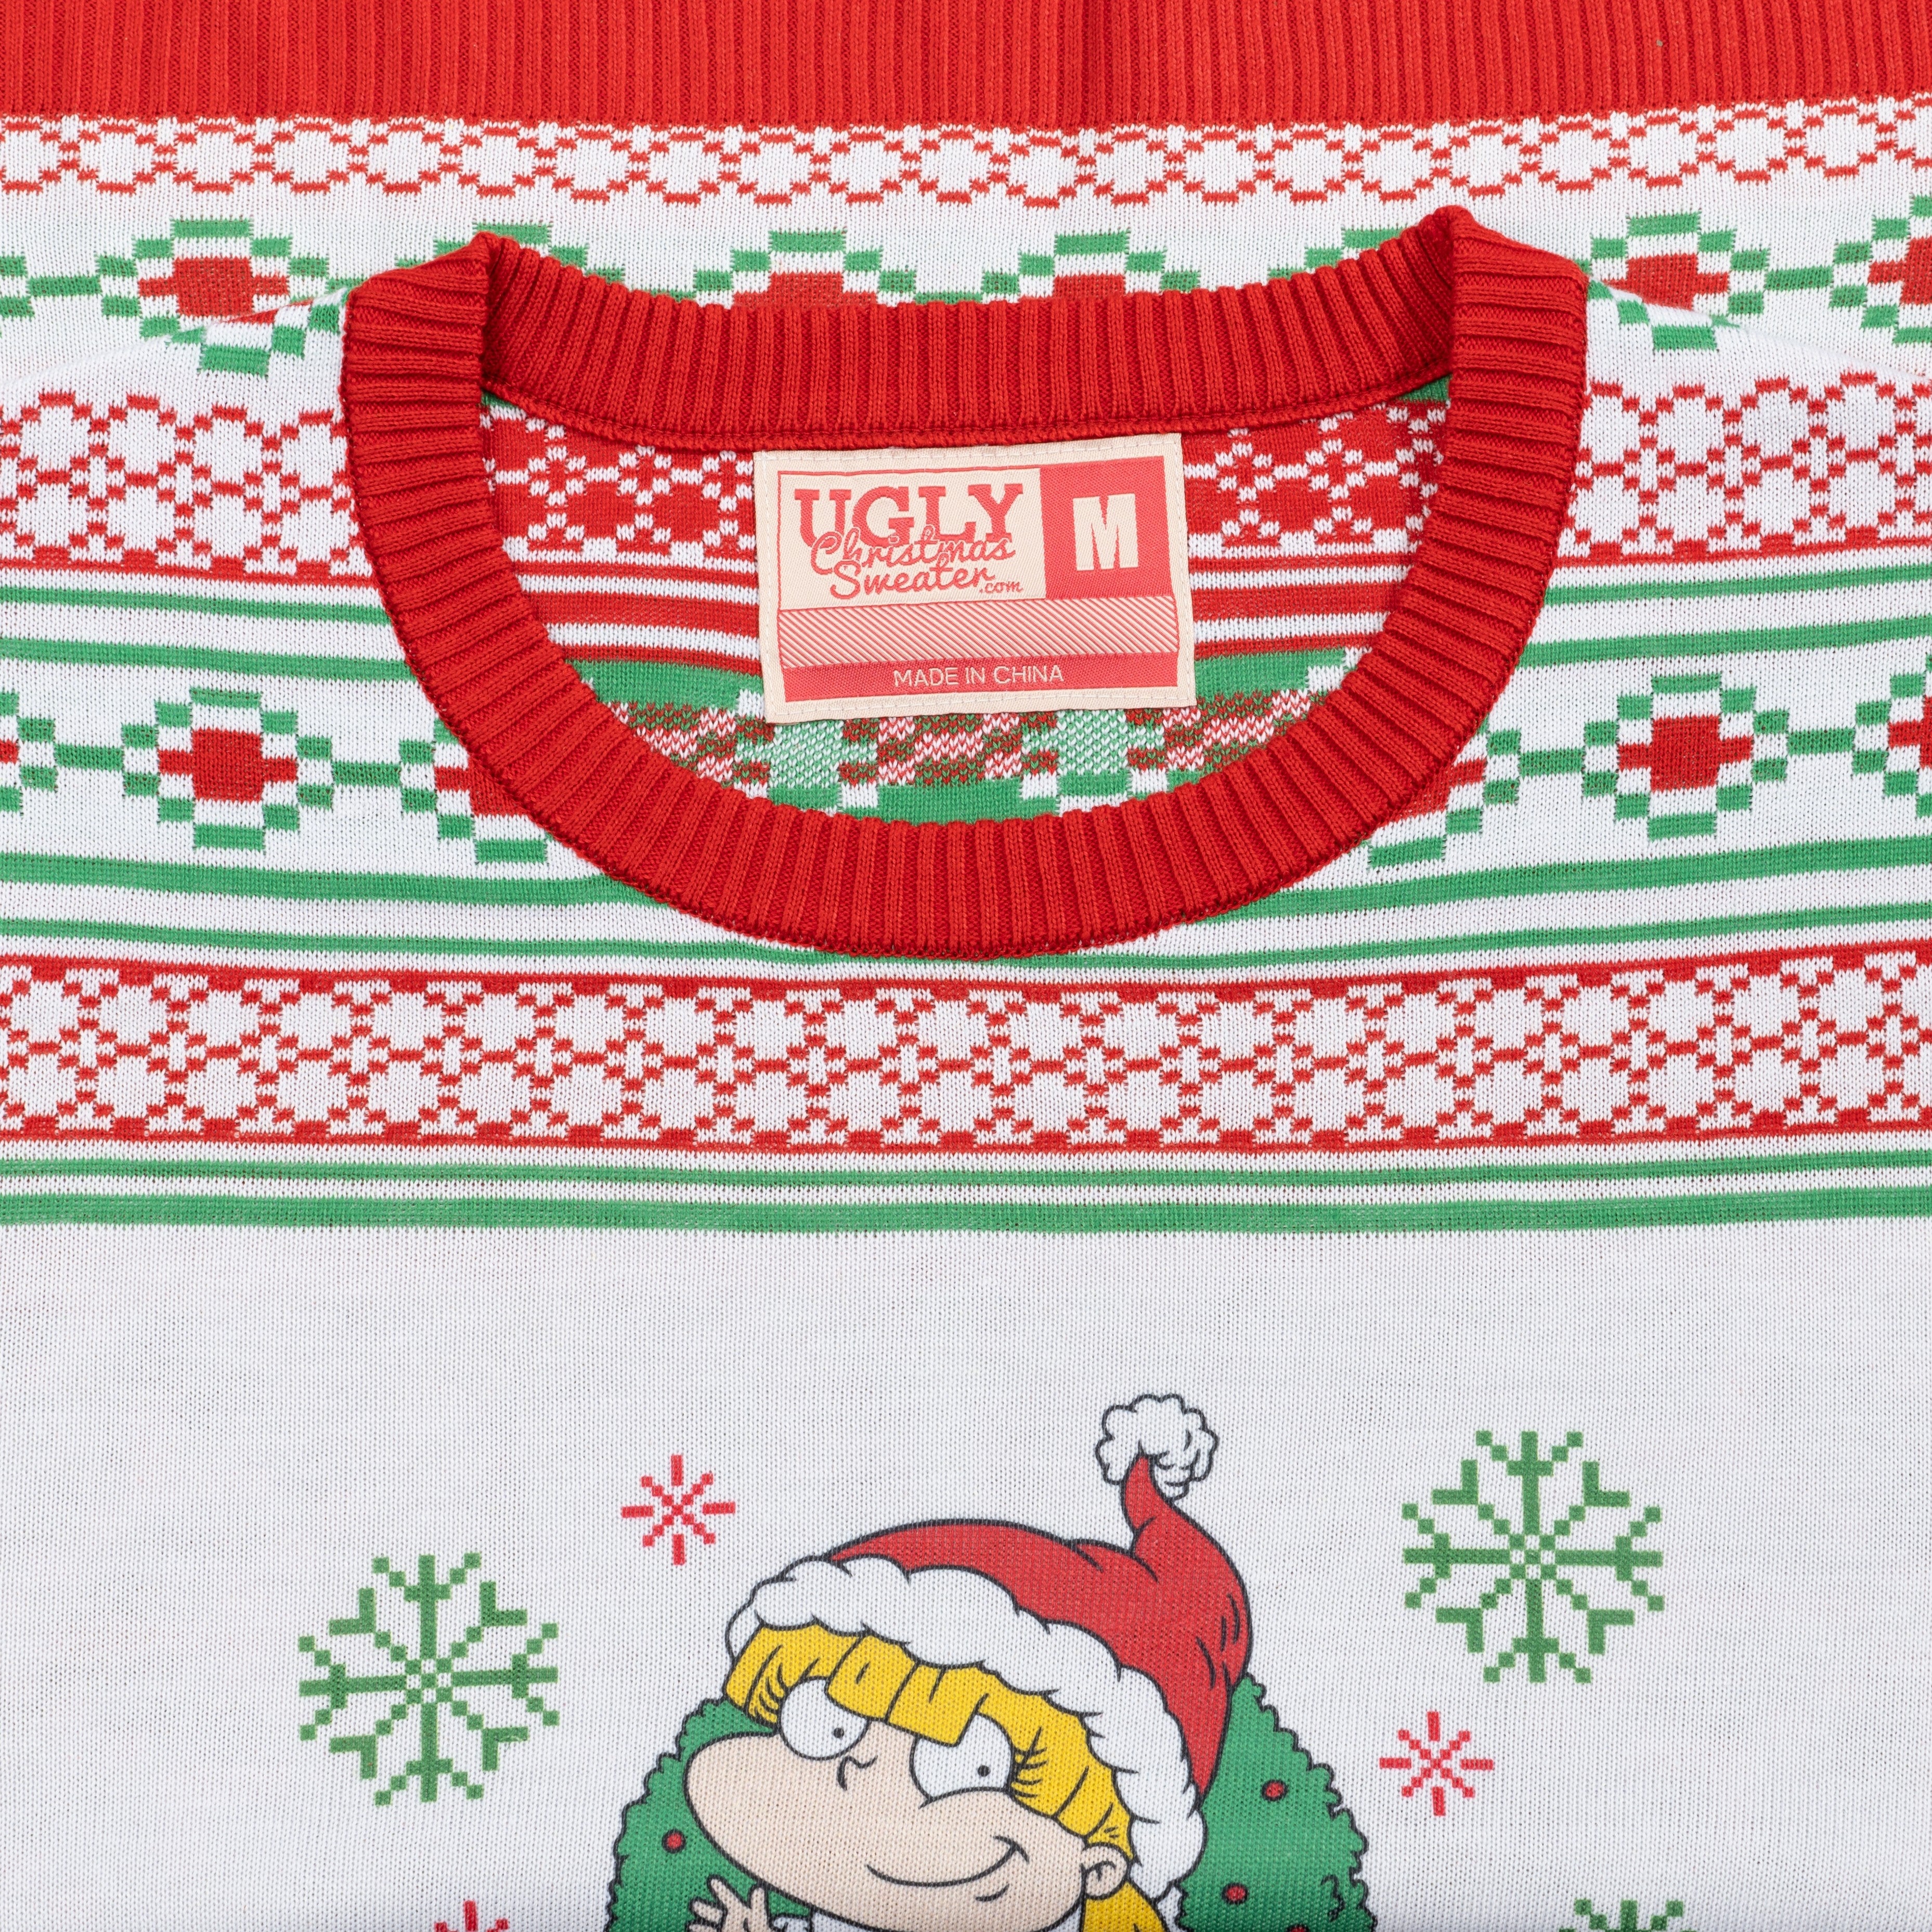 Rugrats Angelica Christmas Sweater